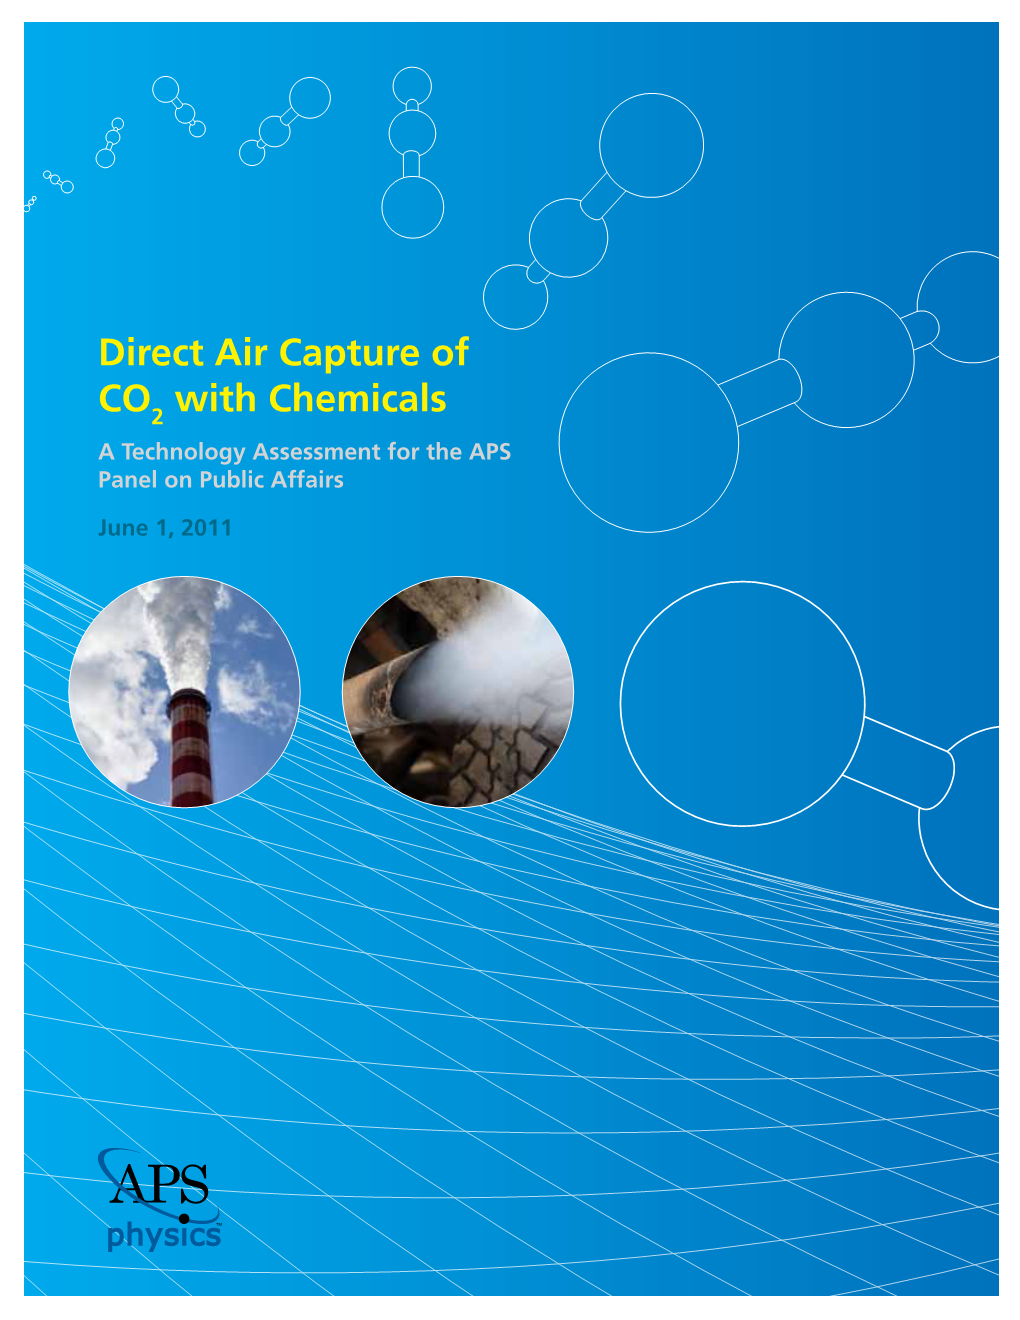 Direct Air Capture of CO2 with Chemicals June 1, 2011